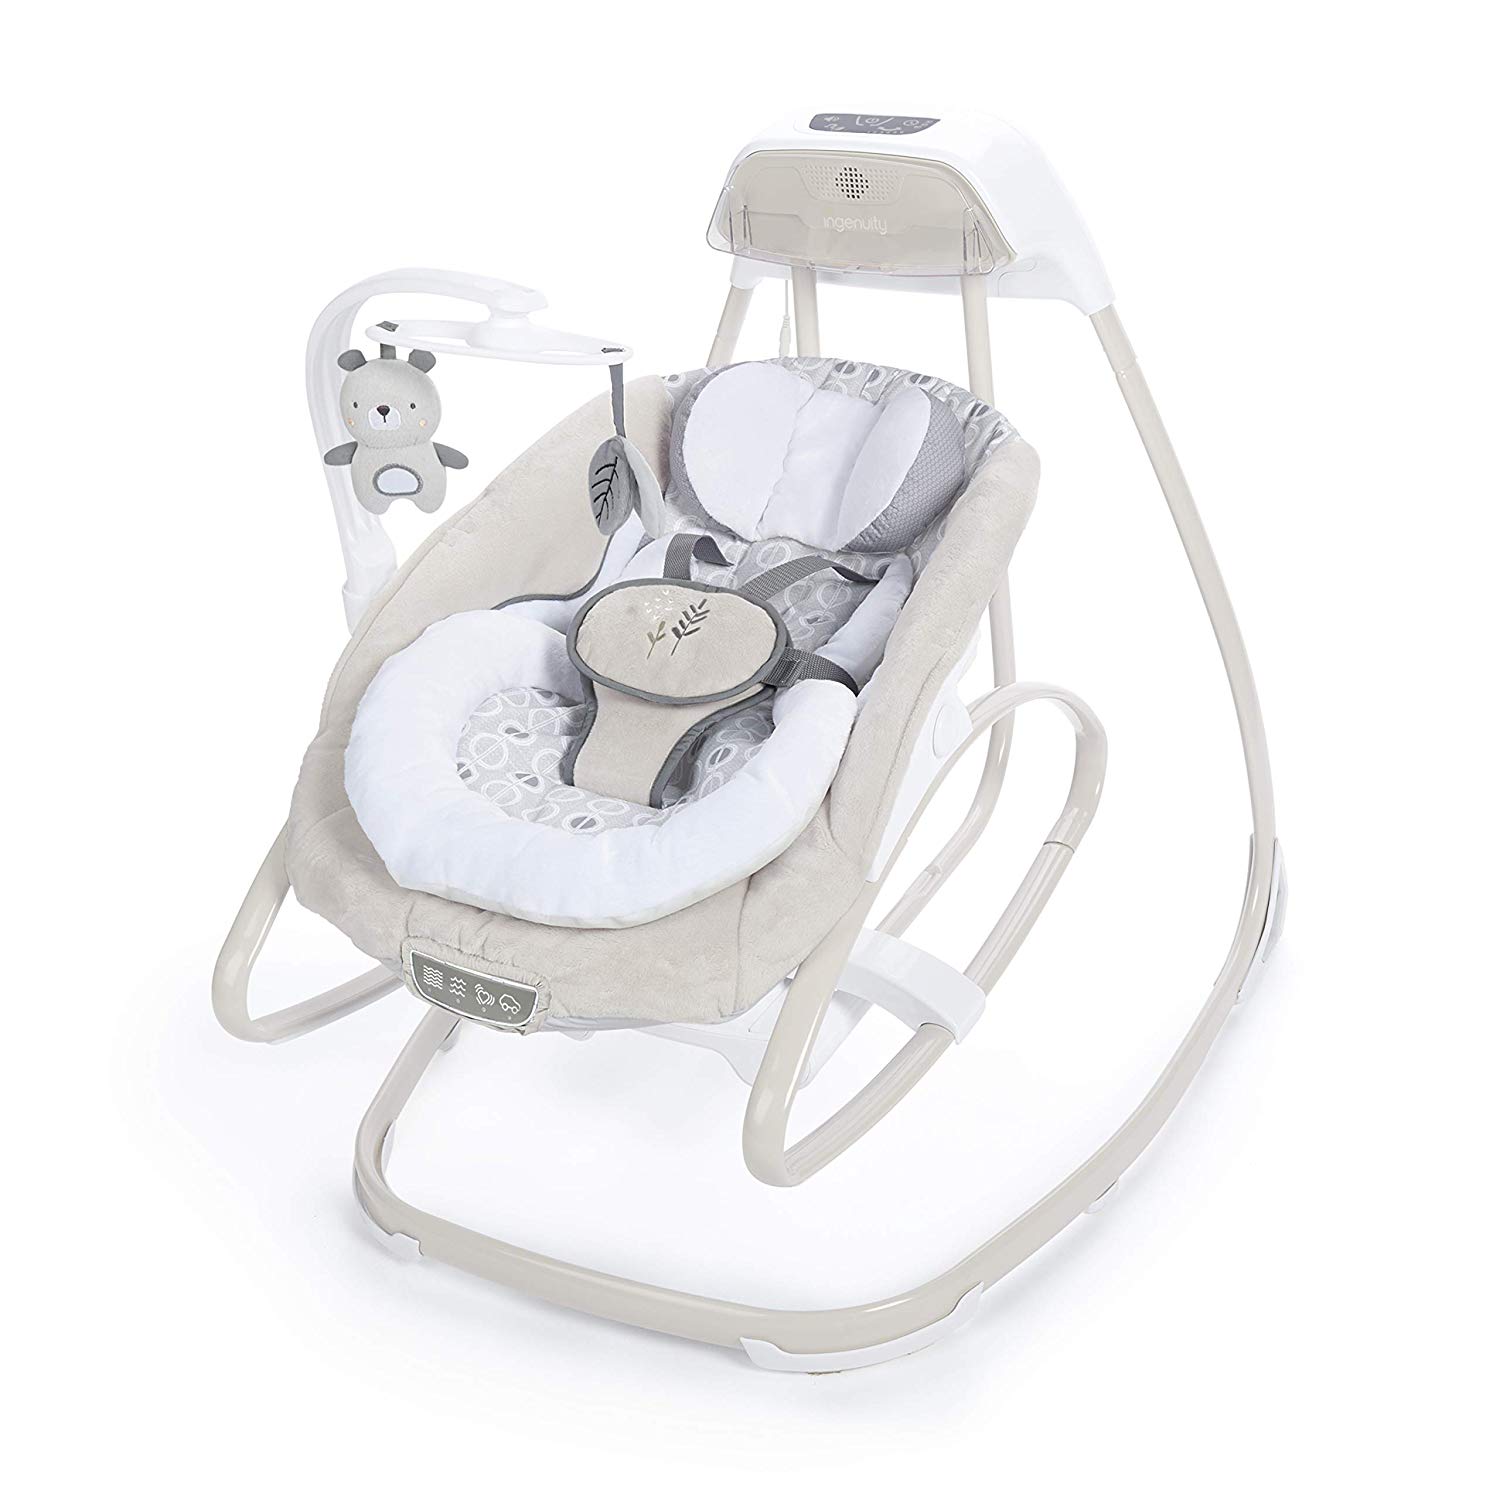 Ingenuity, Holden Panda 2 in 1 Baby Swing and Rocker with Vibrations, Melodies, Automatic Rocking Function, Timer and Power Adapter, Rotates around its Own Axis